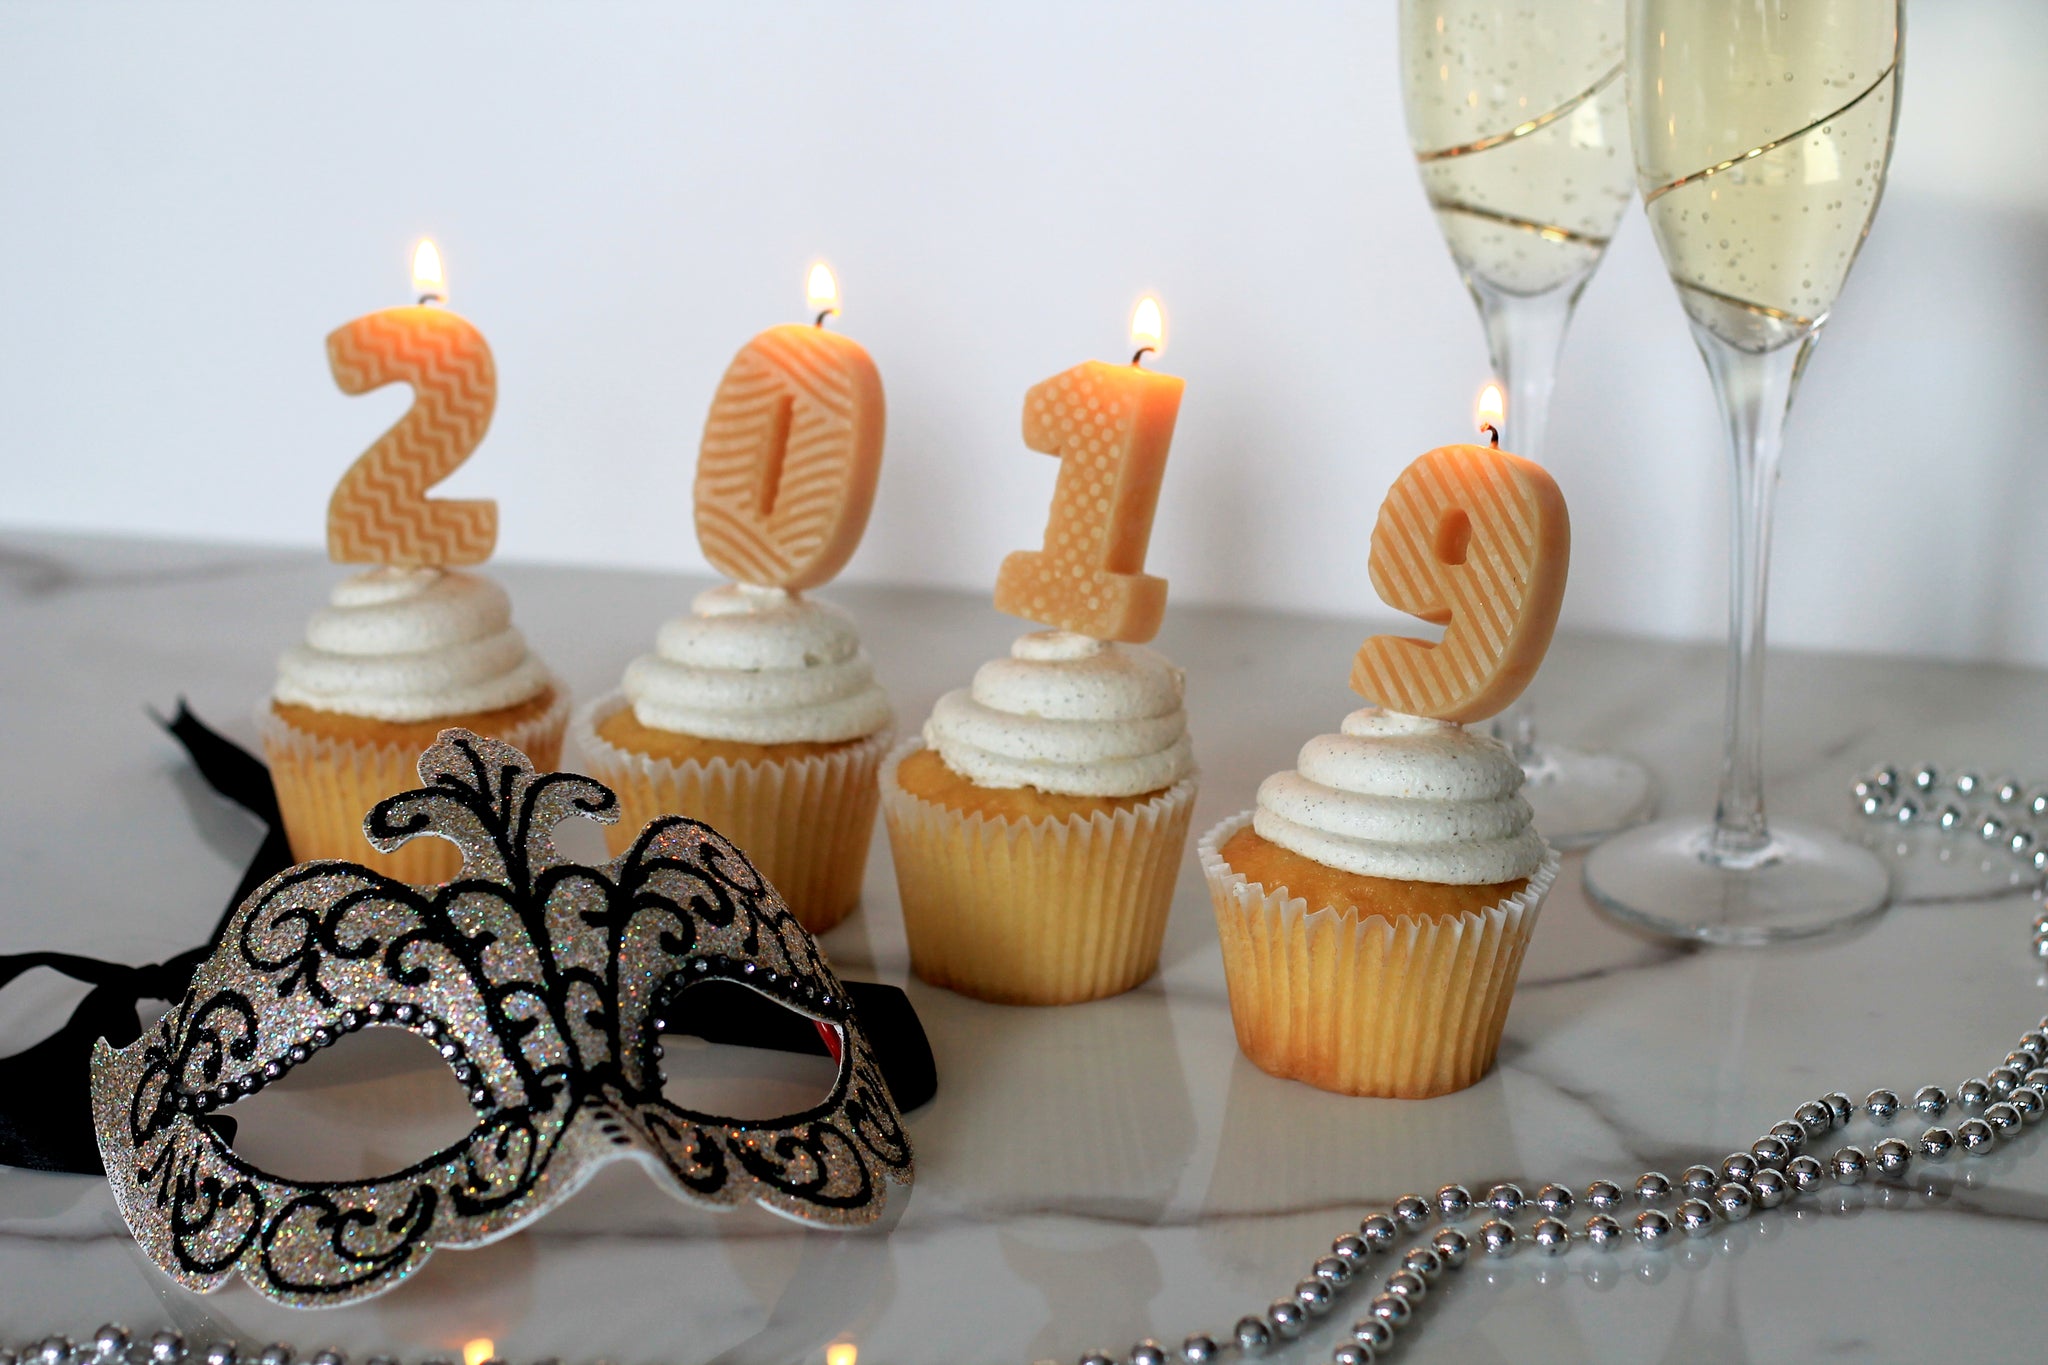 Happy New Year from Honey Candles!